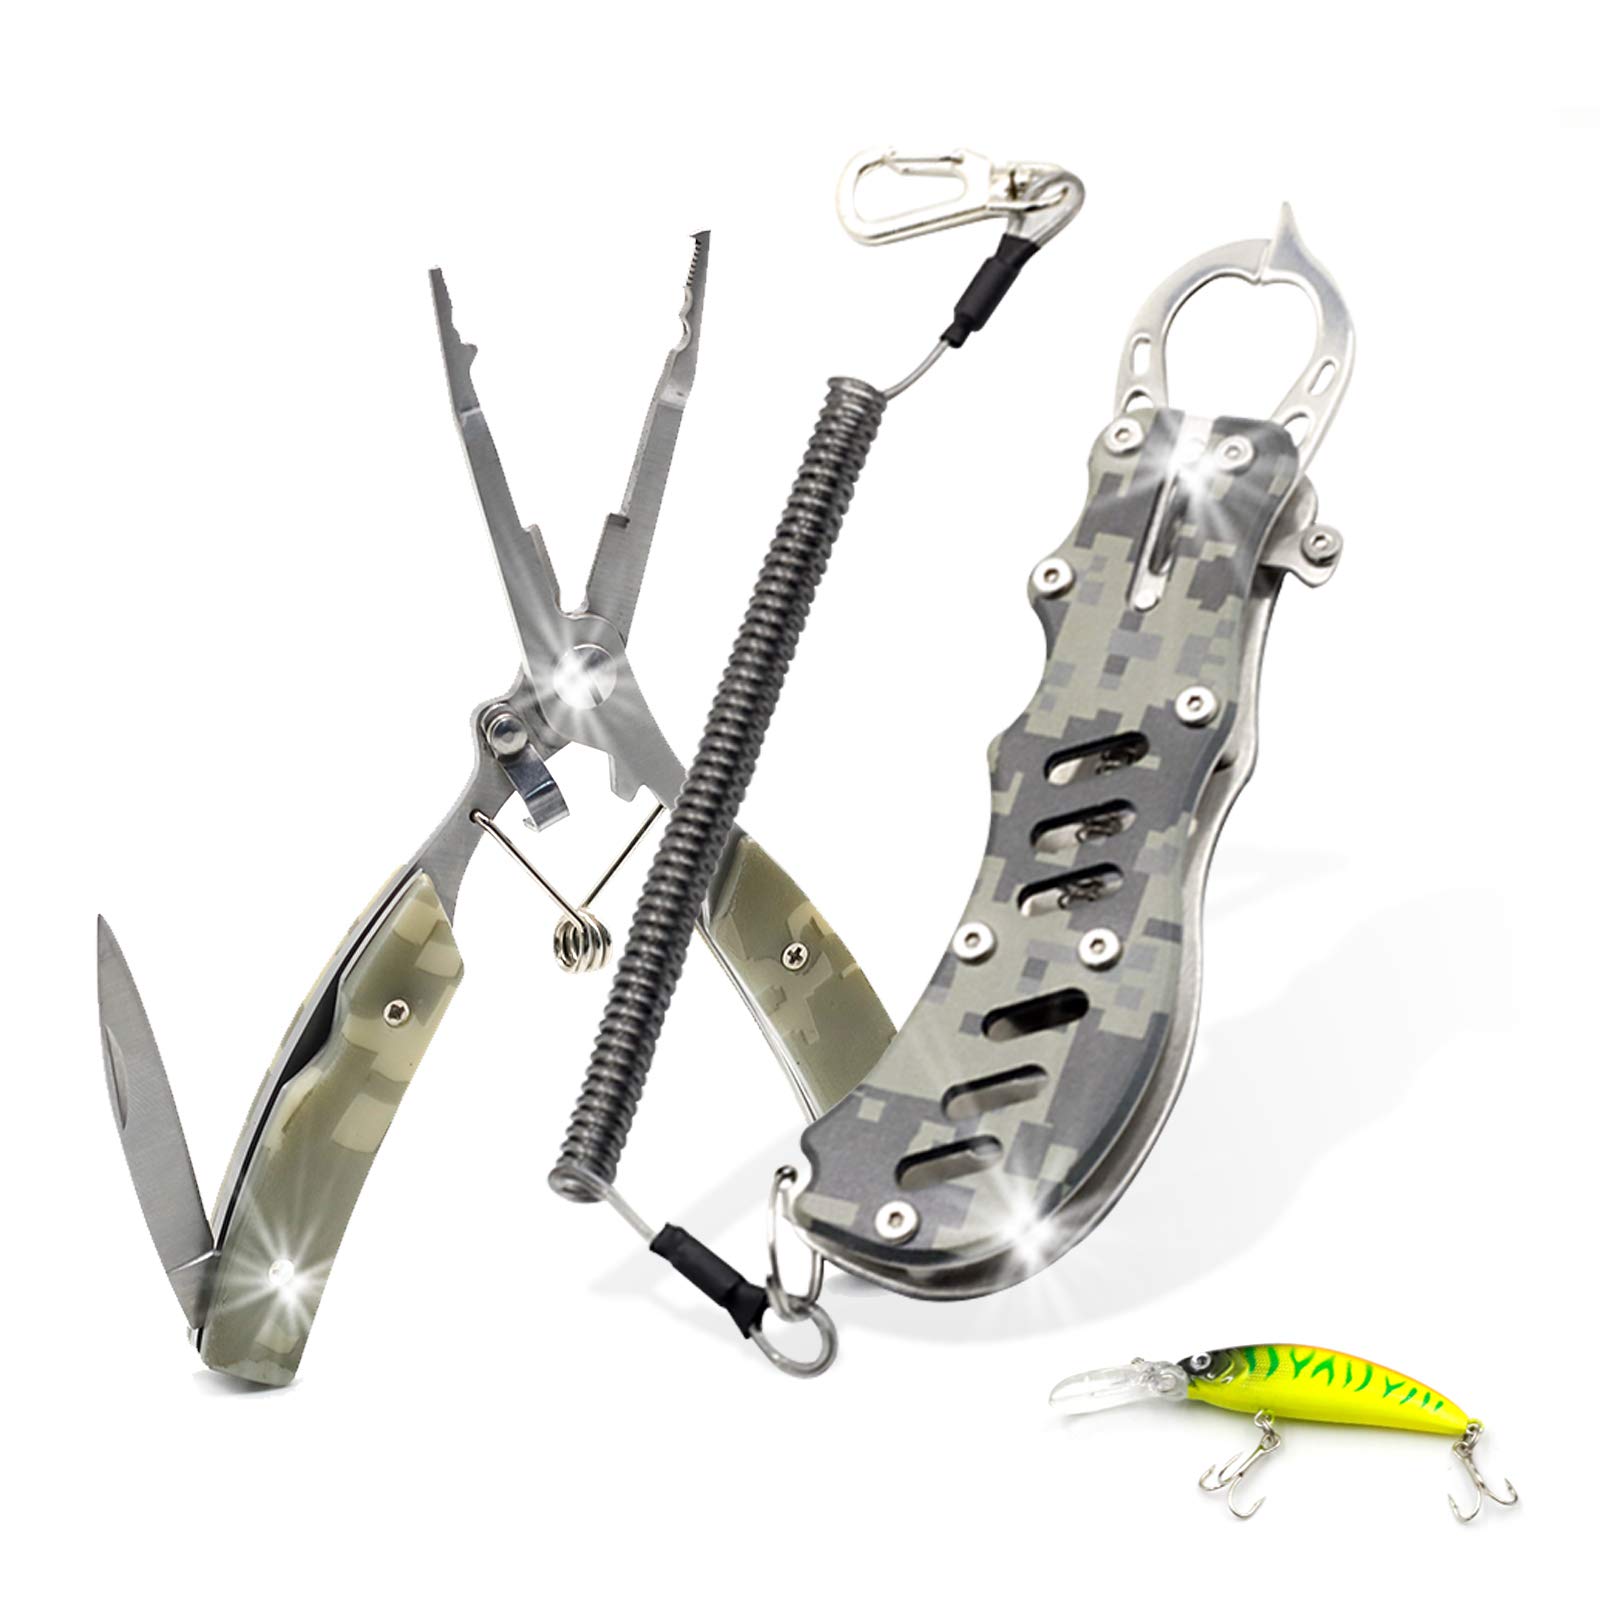  Fishing Gear And Equipment